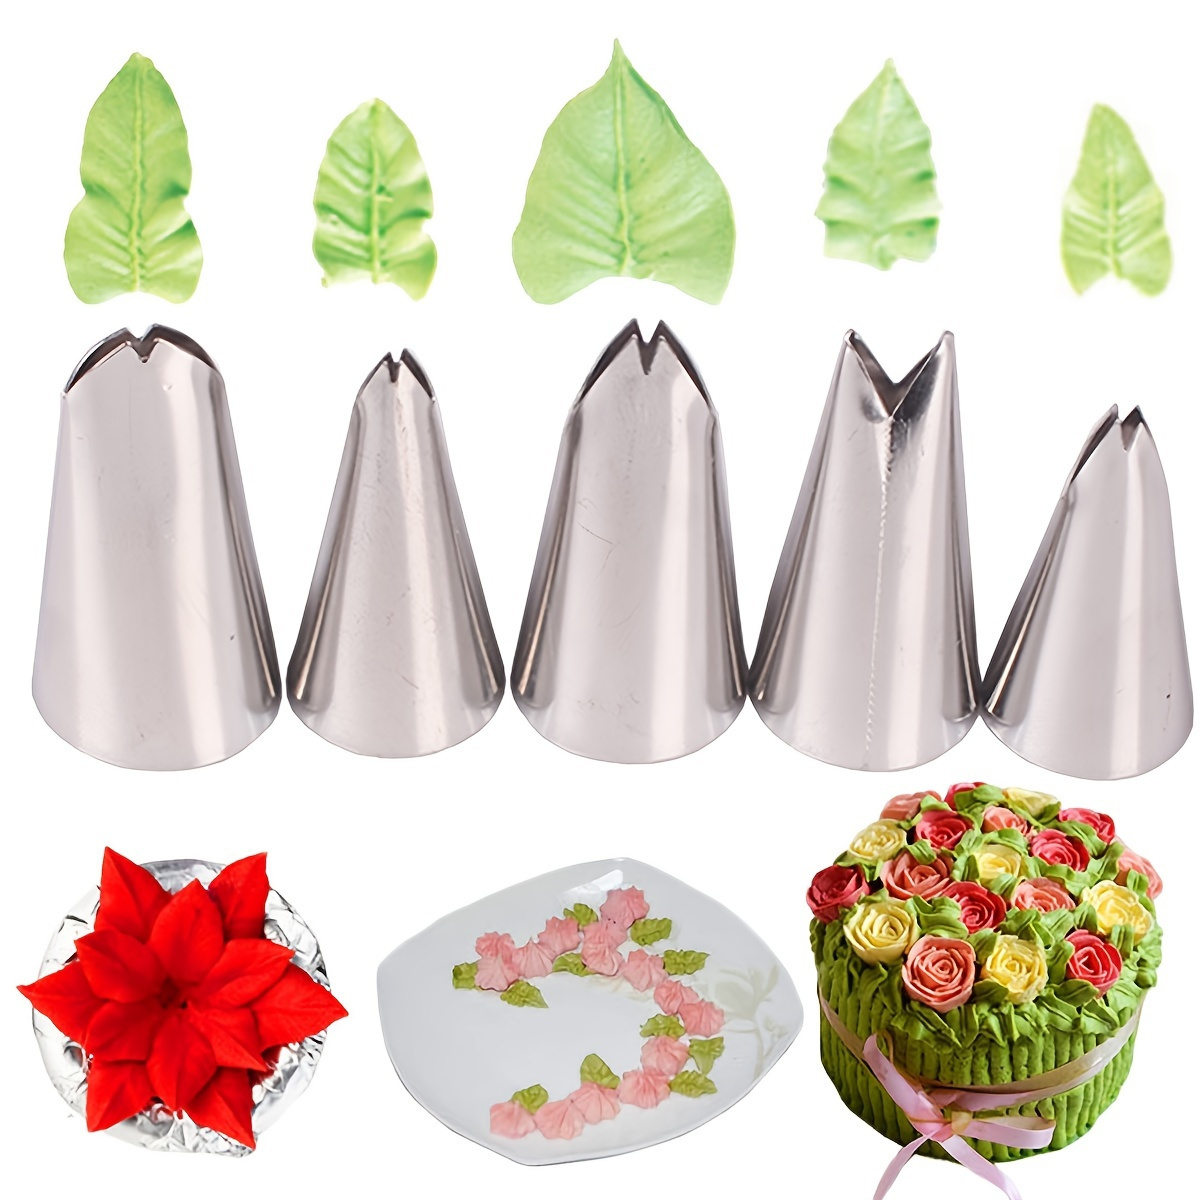 

5pcs Leaf Piping Tips, Cake Piping Icing Nozzles, Stainless Steel Cake Decorating Tips Set, Diy Baking Supplies, Cake Decorating Tools, 0.78/0.71inch